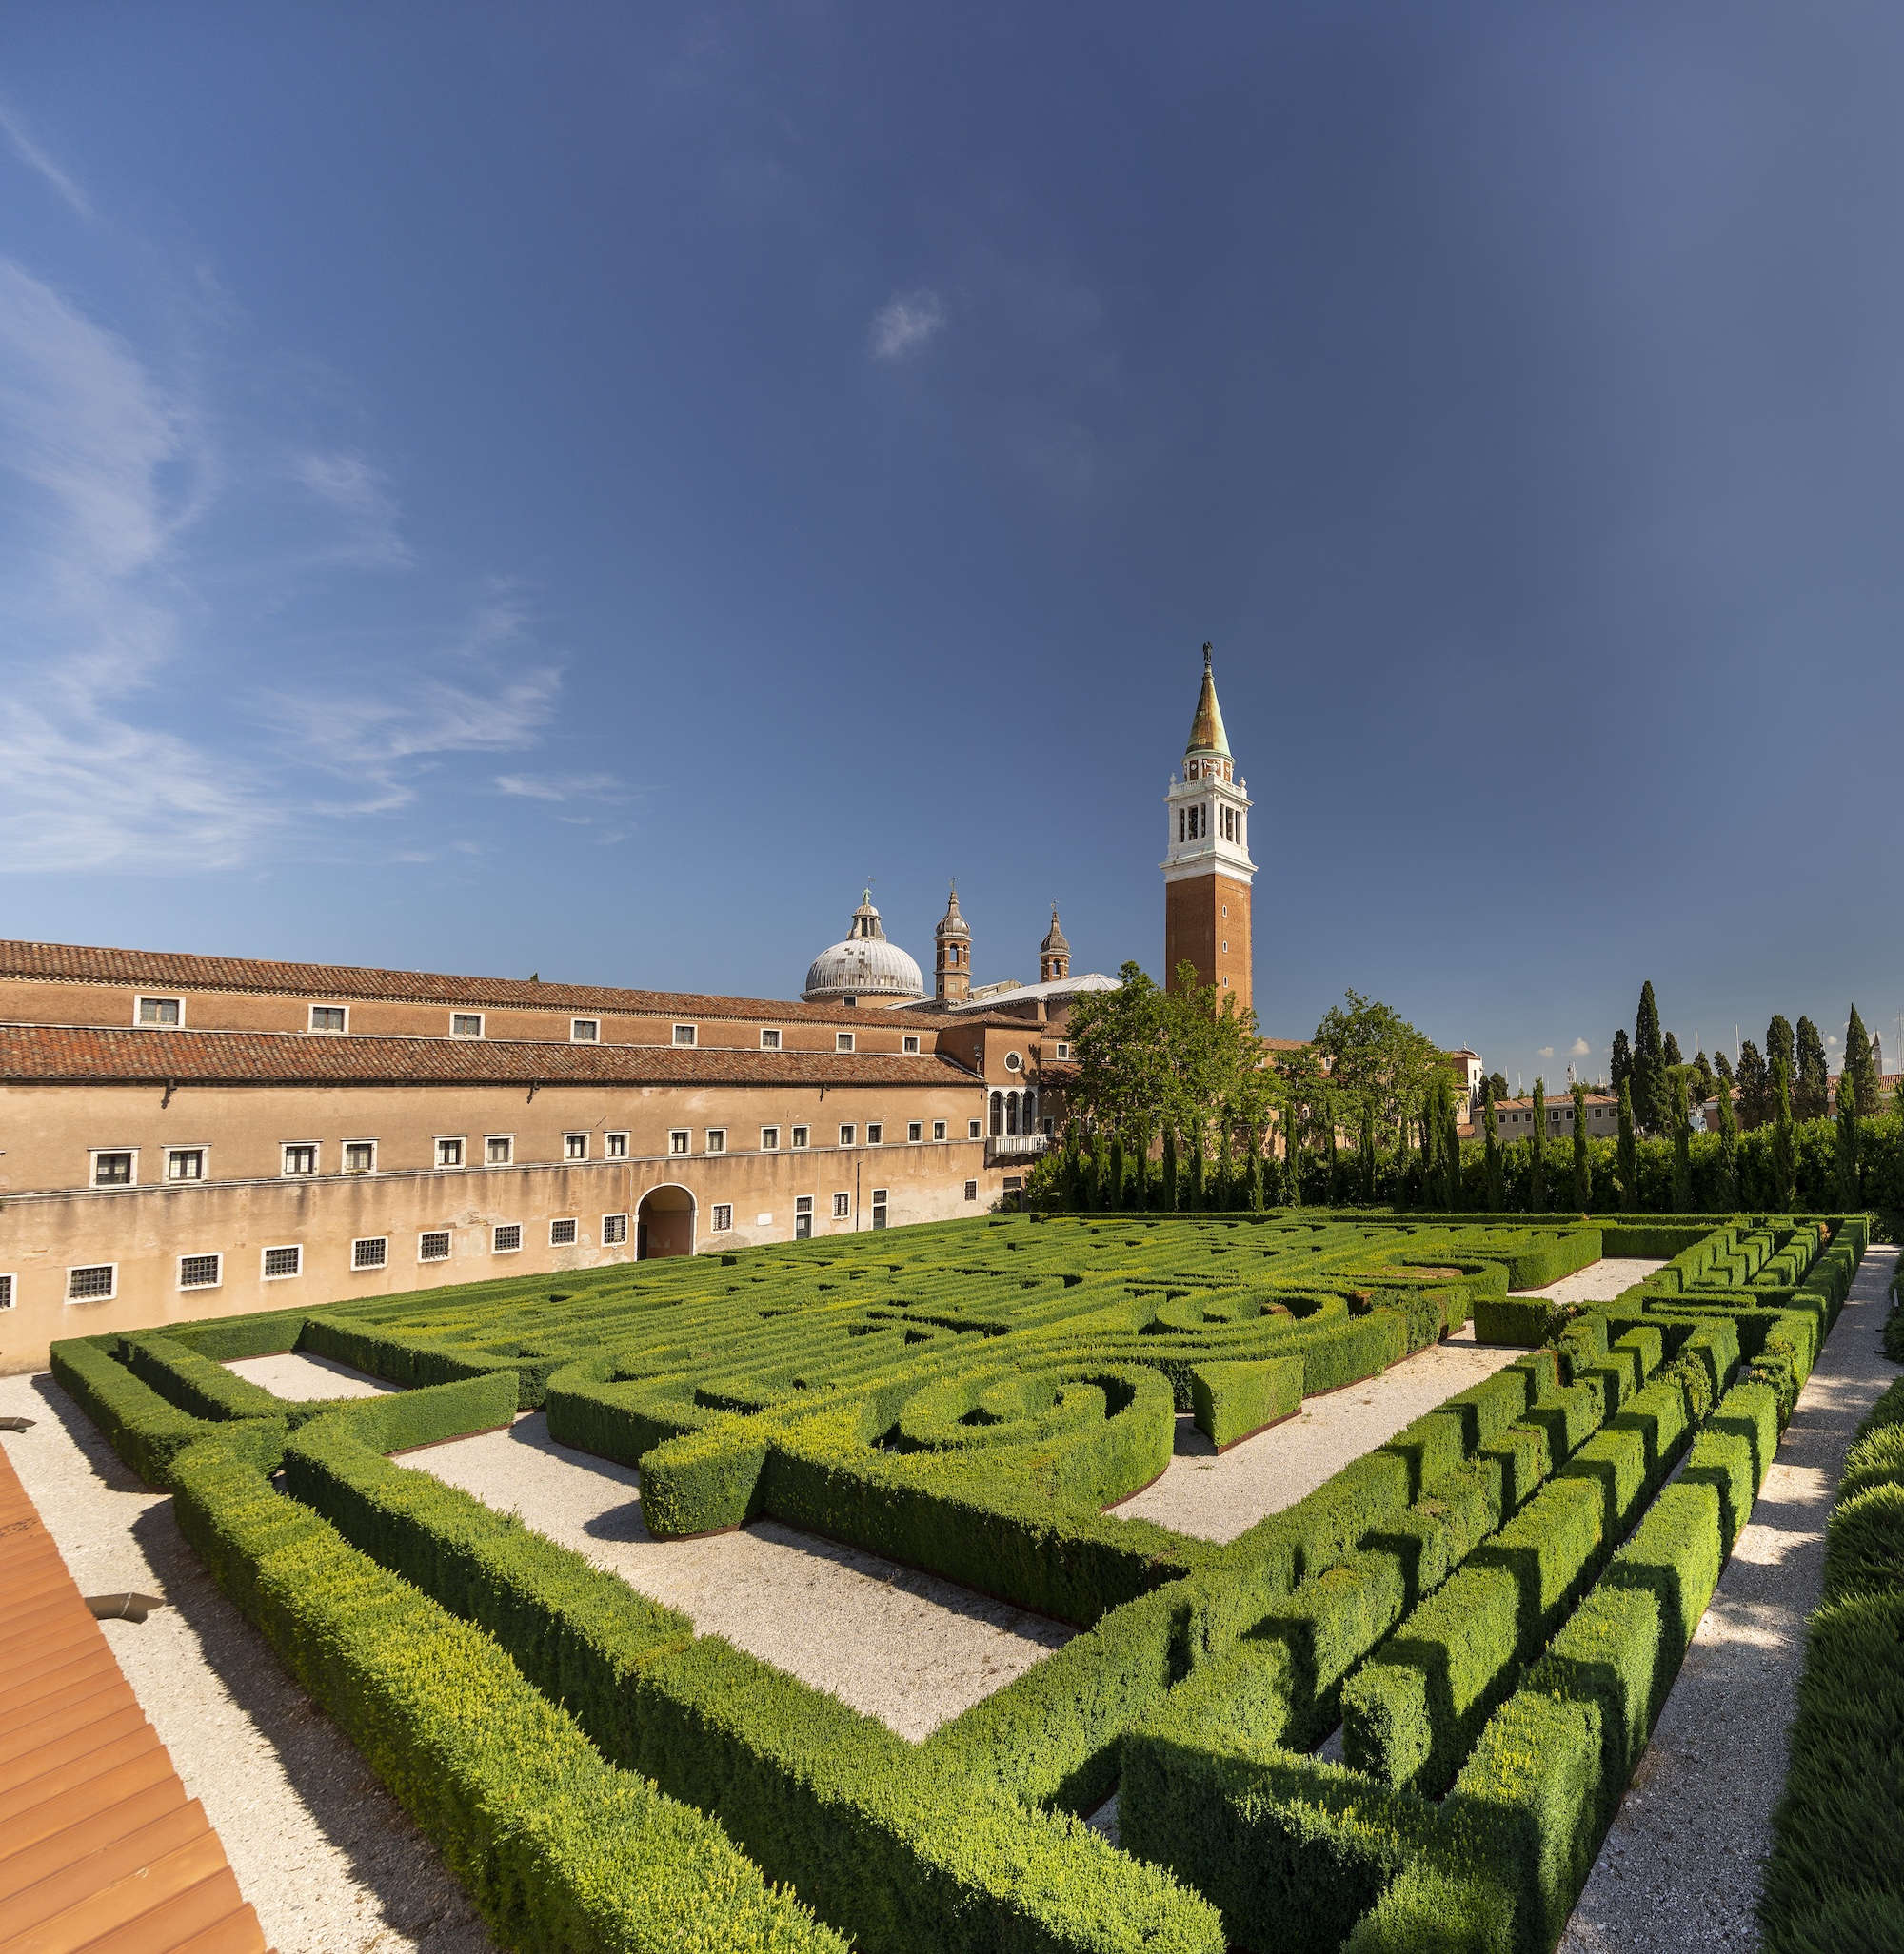 The Borges Labyrinth with, in the background, the church and monastery of San Giorgio in Venice. Photo: Matteo De Fina